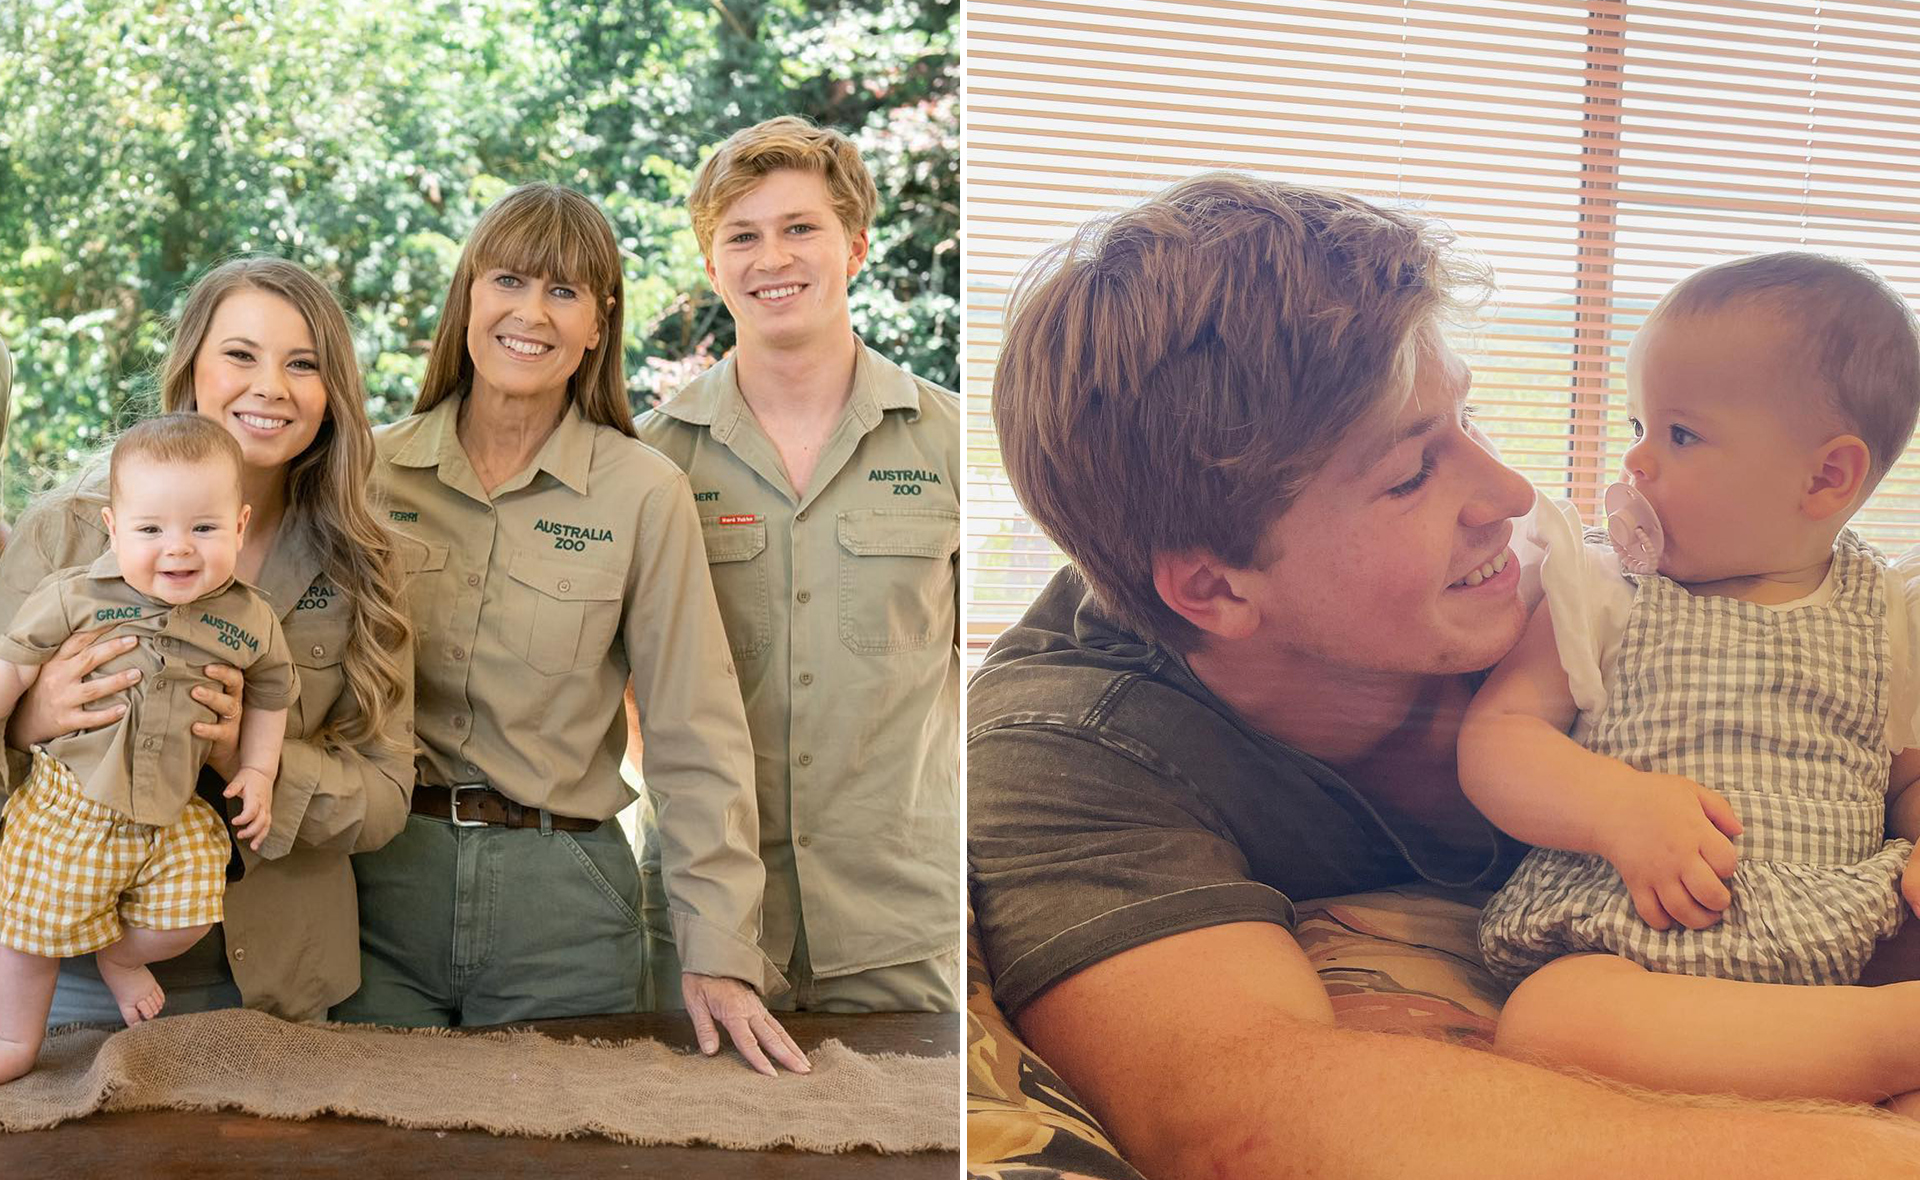 Robert Irwin reveals the uncle duty that was the “most terrifying experience” of his life